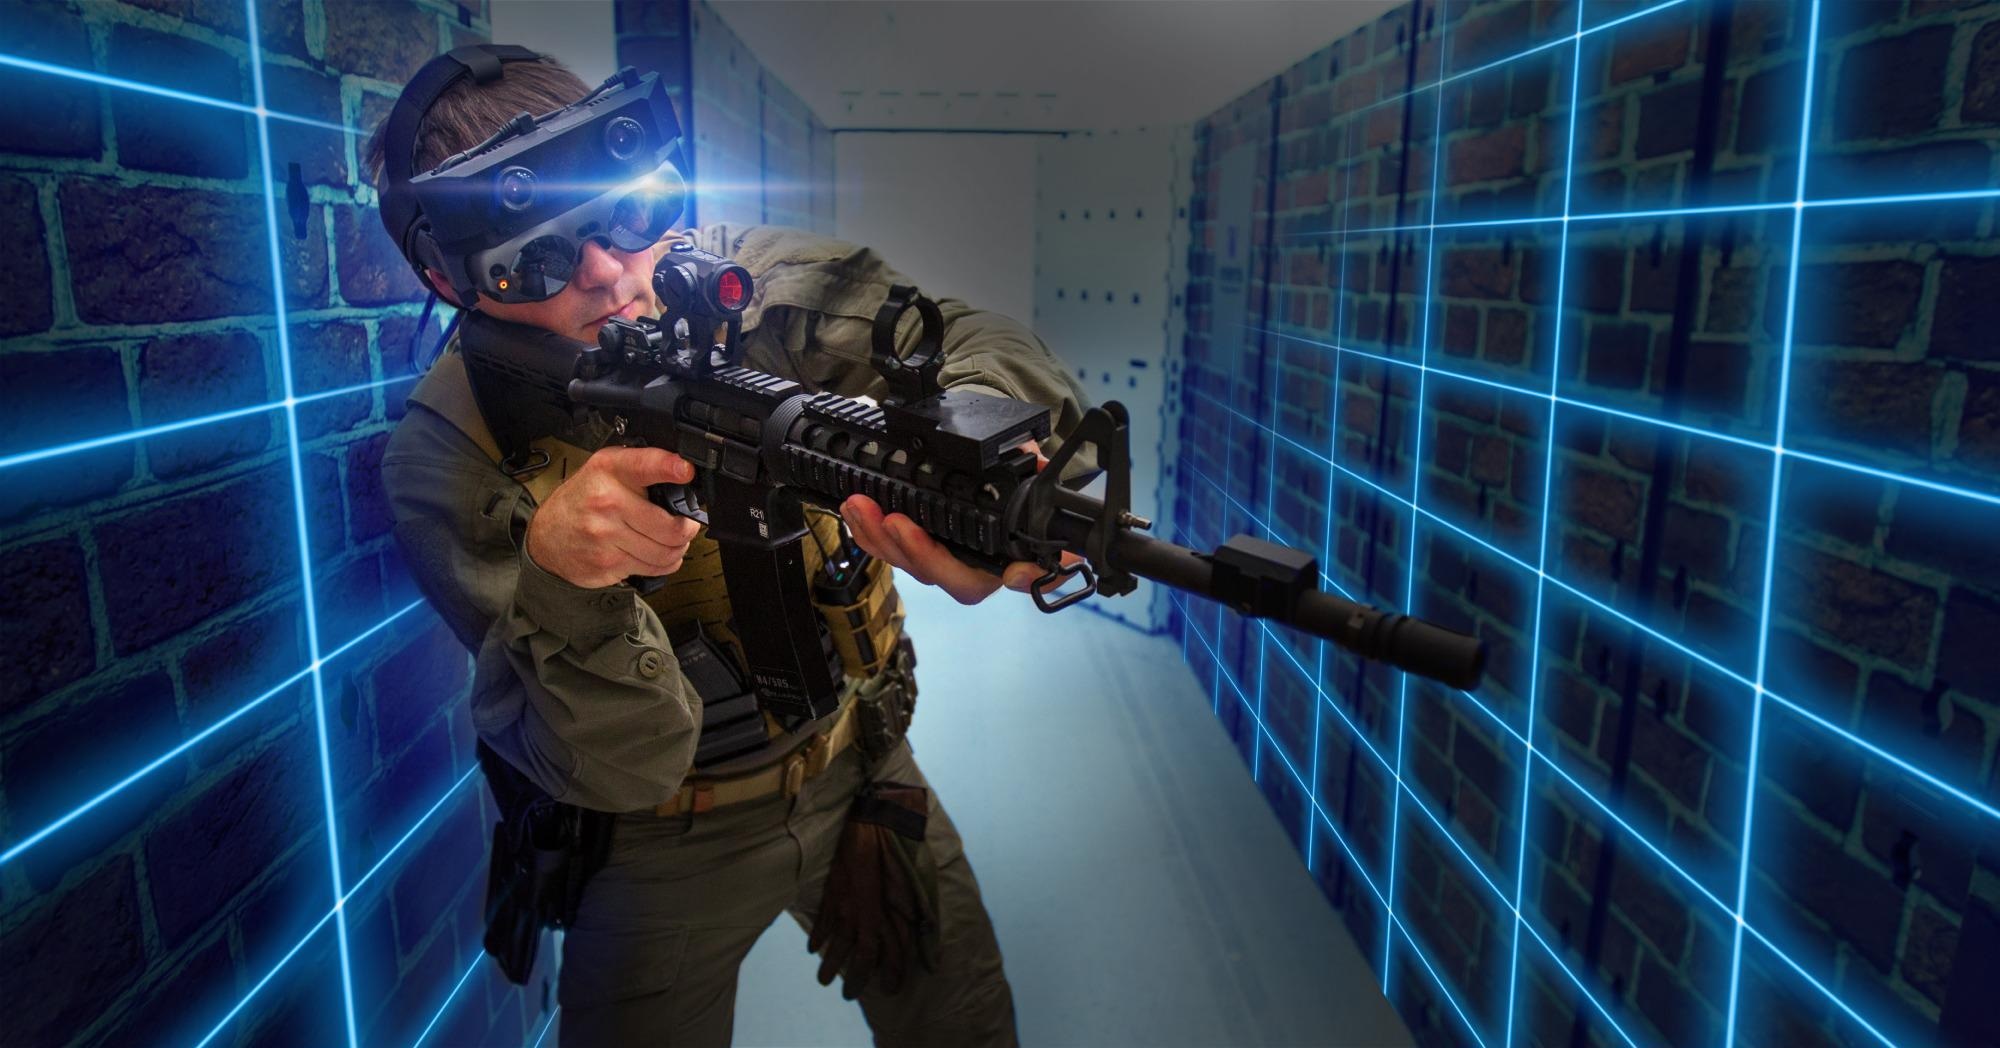 InVeris Training Solutions Unveils SRCE™ – A Revolutionary, Augmented Reality Training System